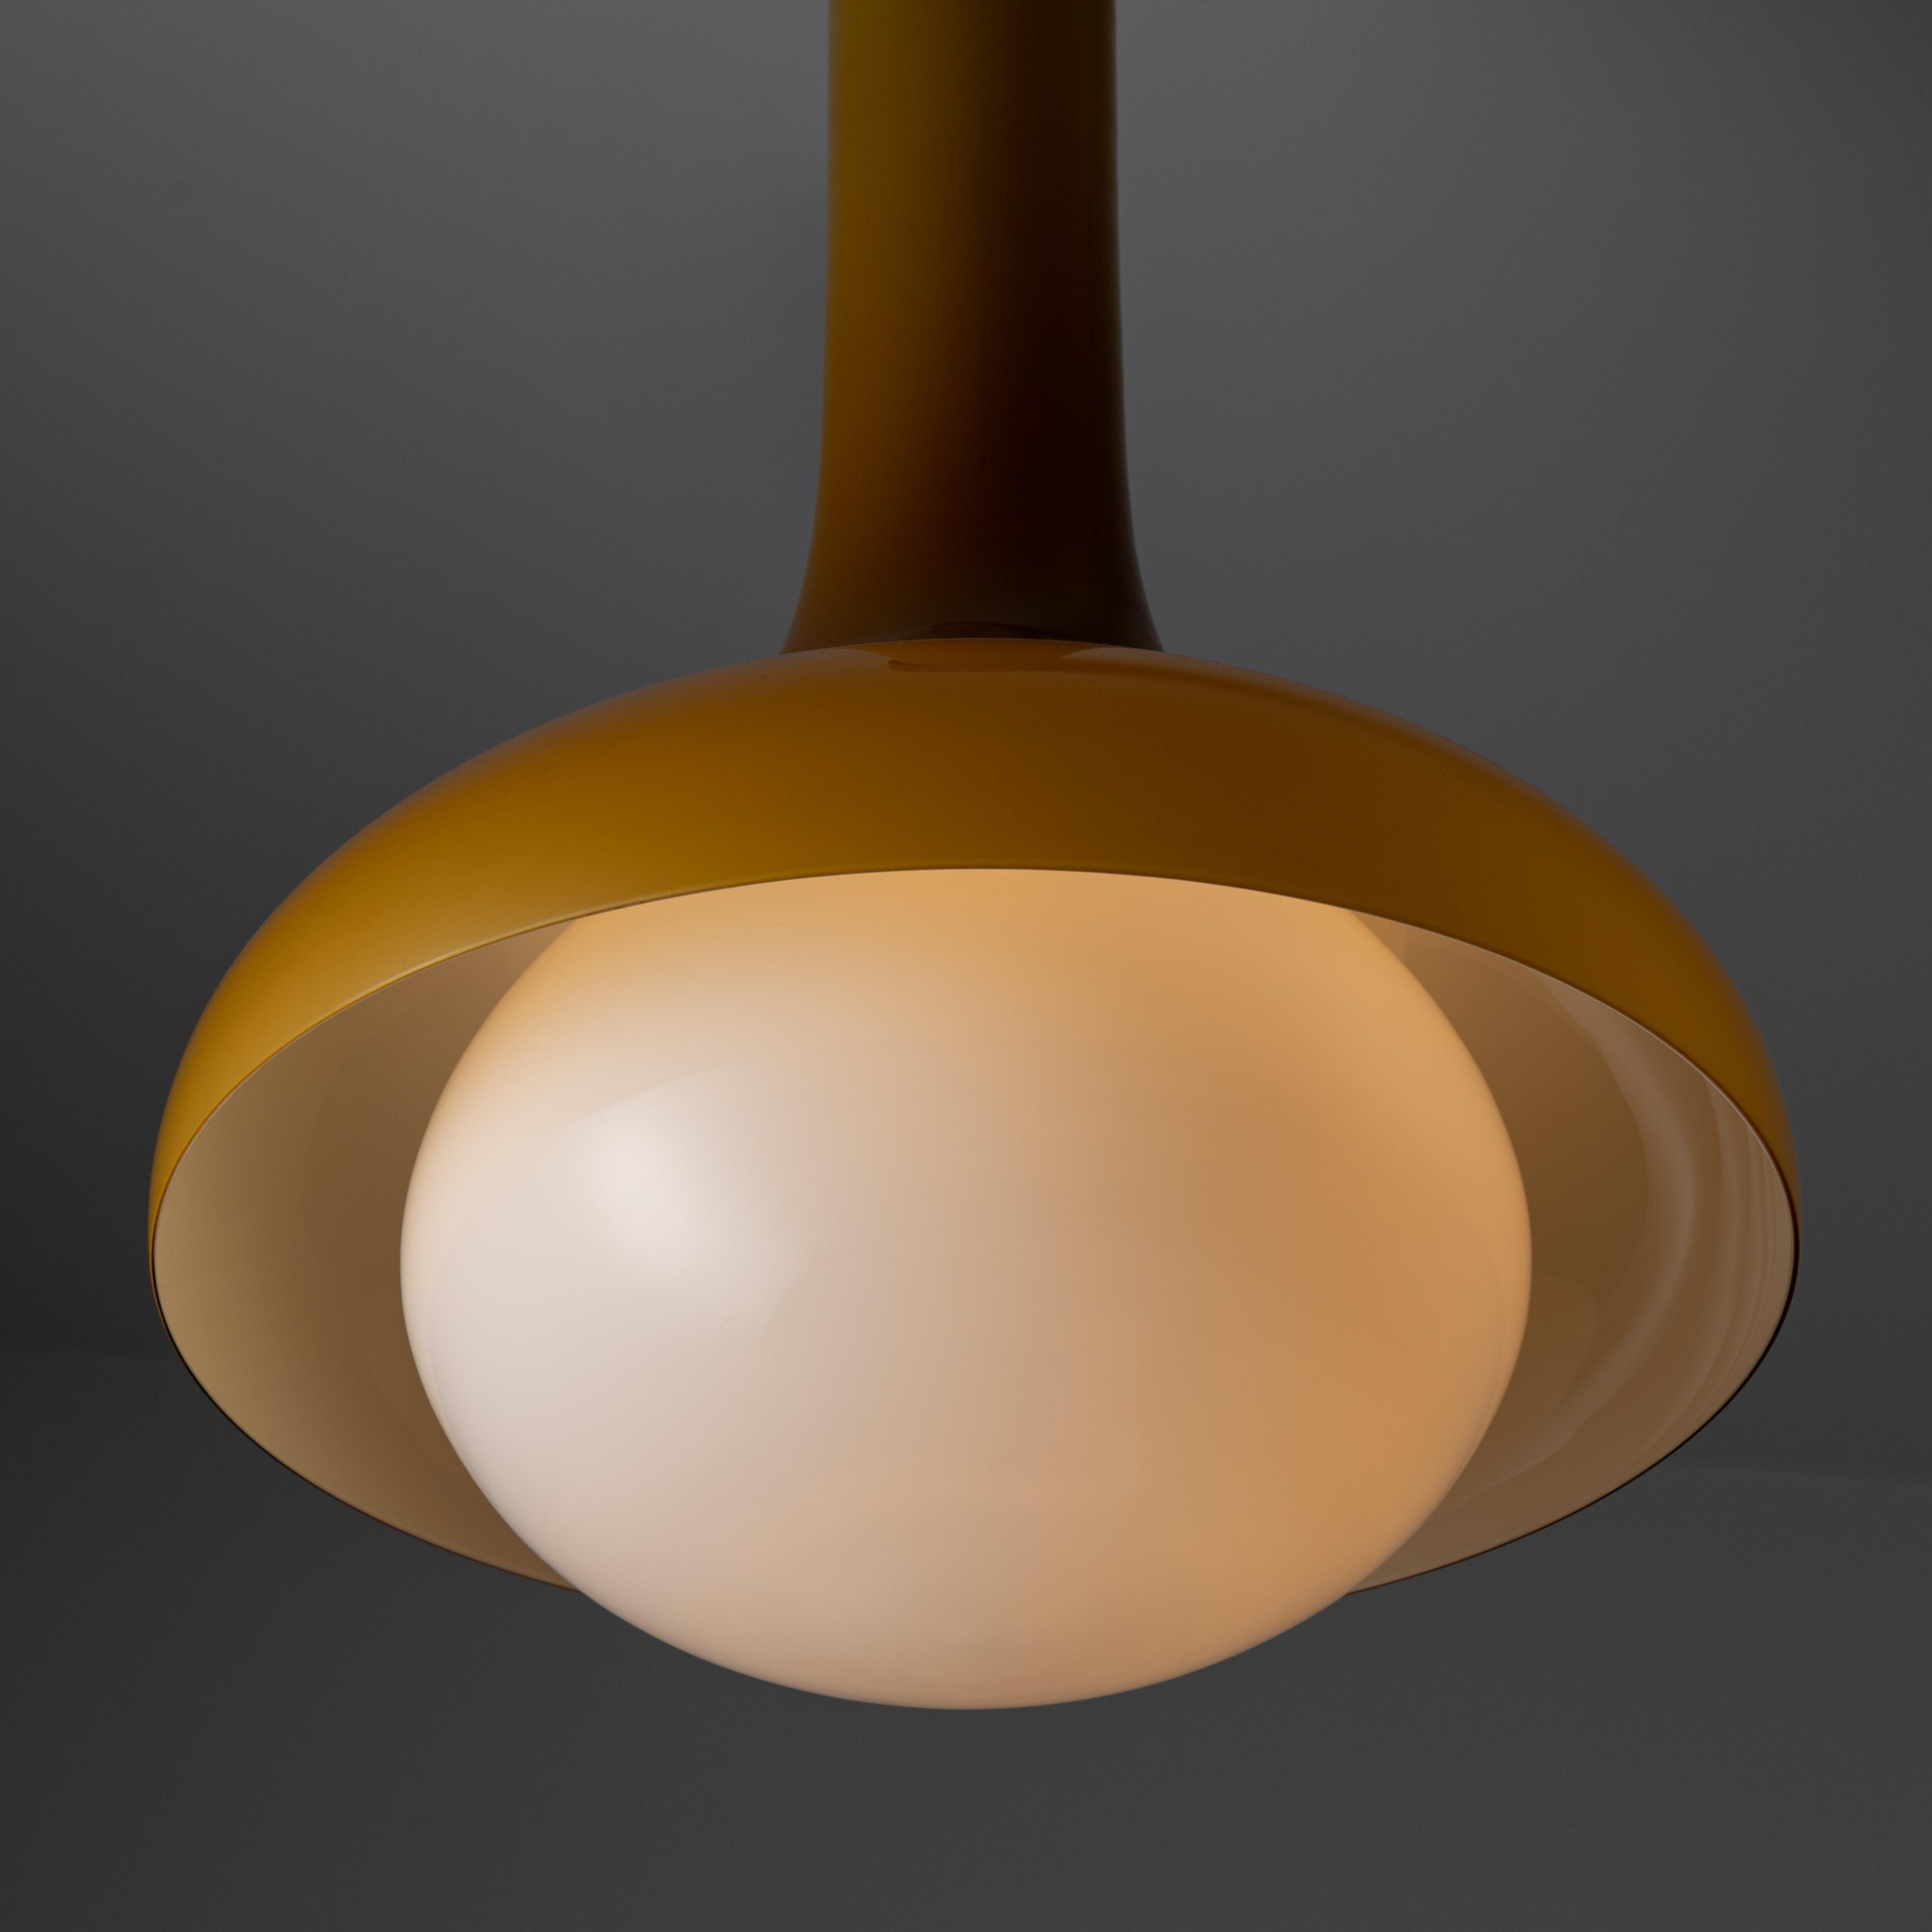 Murano glass ceiling light by Carlo Nason for Vistosi. Designed and manufactured in Italy, circa the 1960s. Beautiful orange tinted all Murano glass stem and outer-shade, paired with an opaline glass bottom diffuser. Brass cuffed canopy at the top.